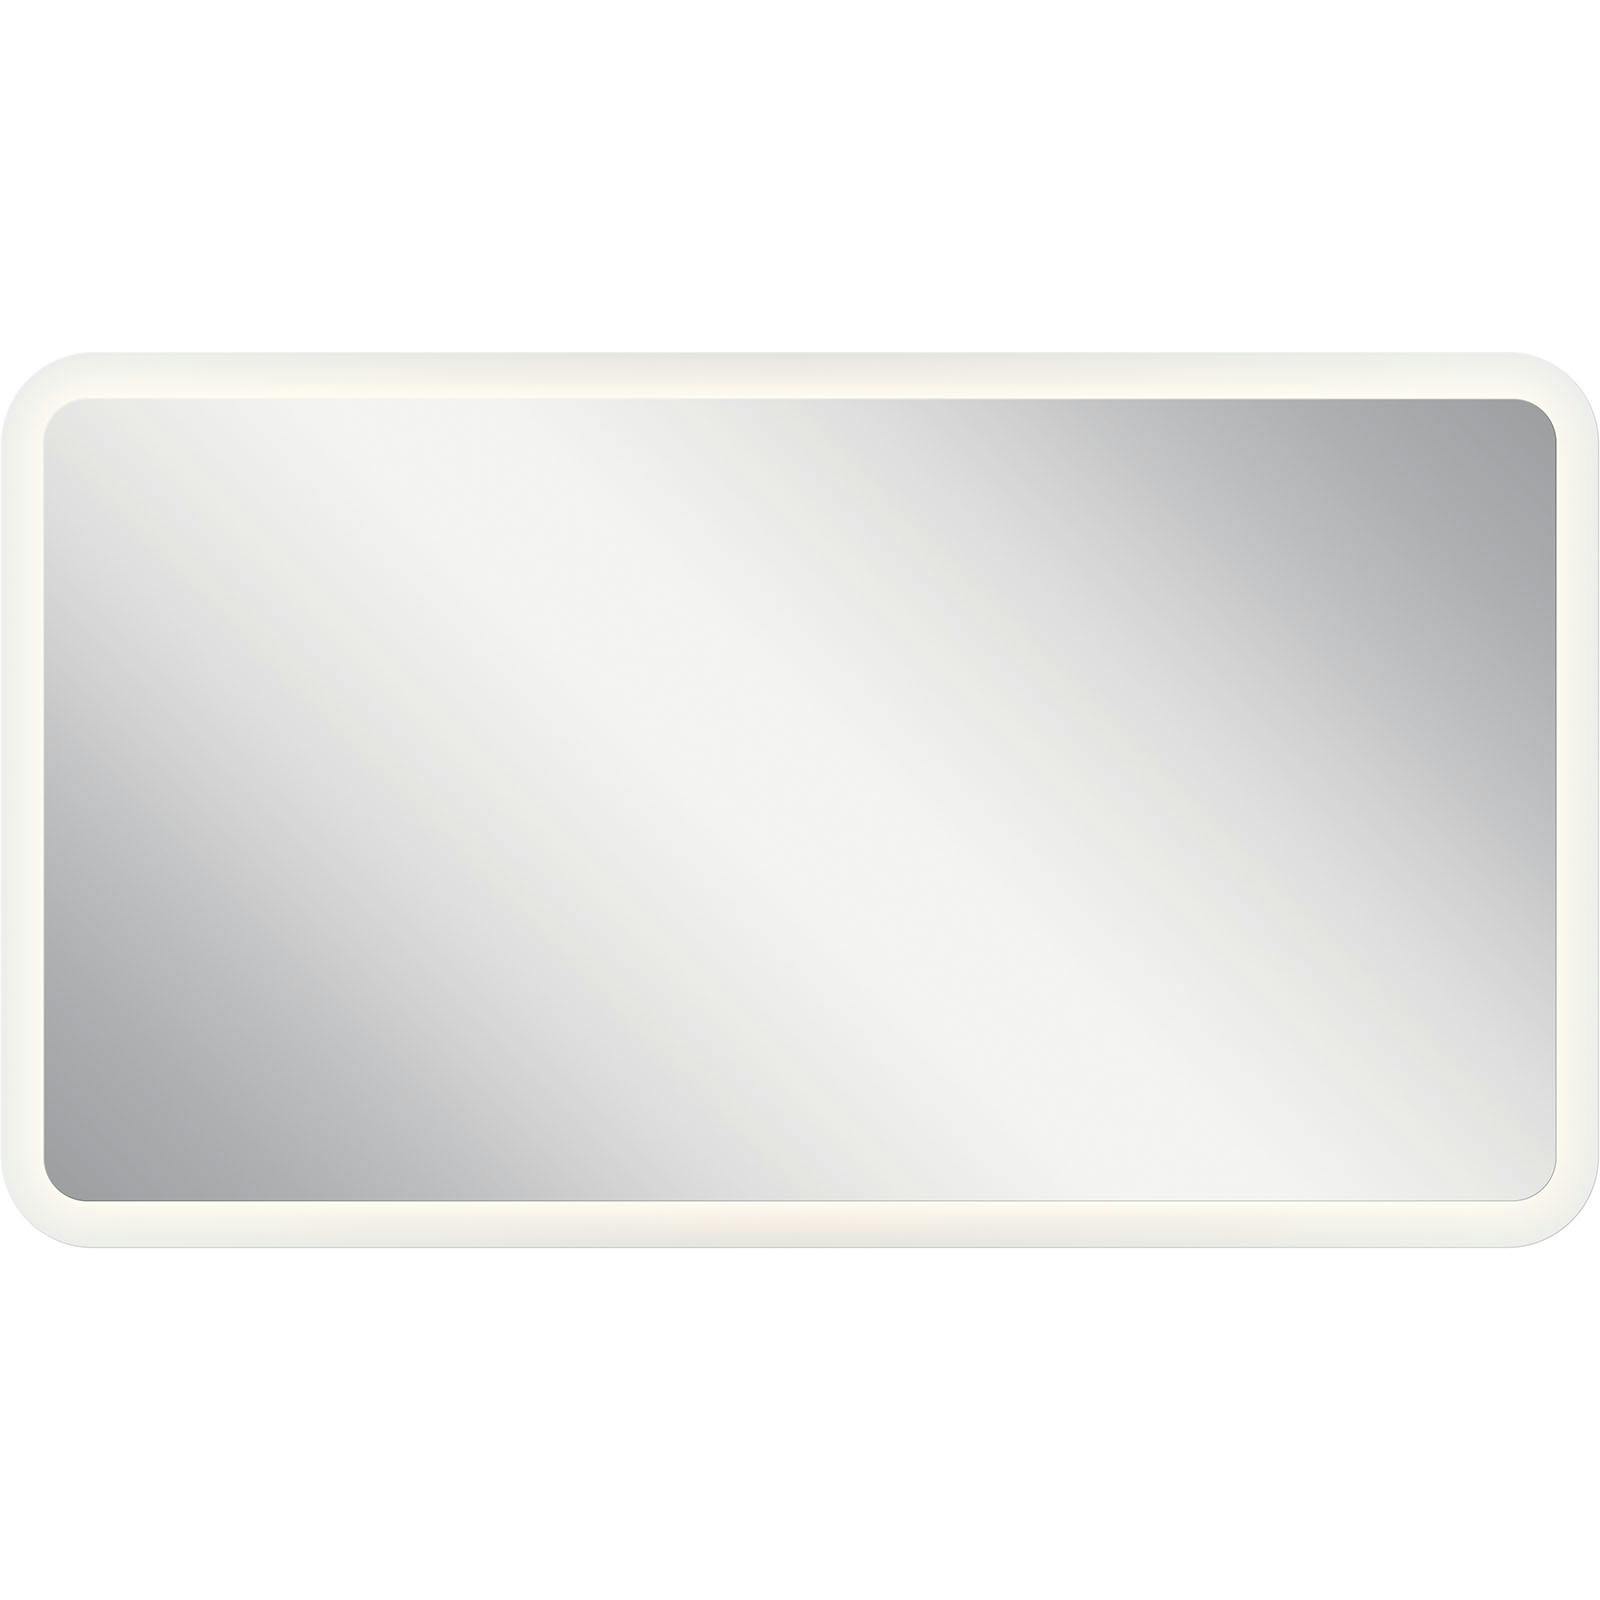 19.75" x 35.5" LED Backlit Mirror on a white background